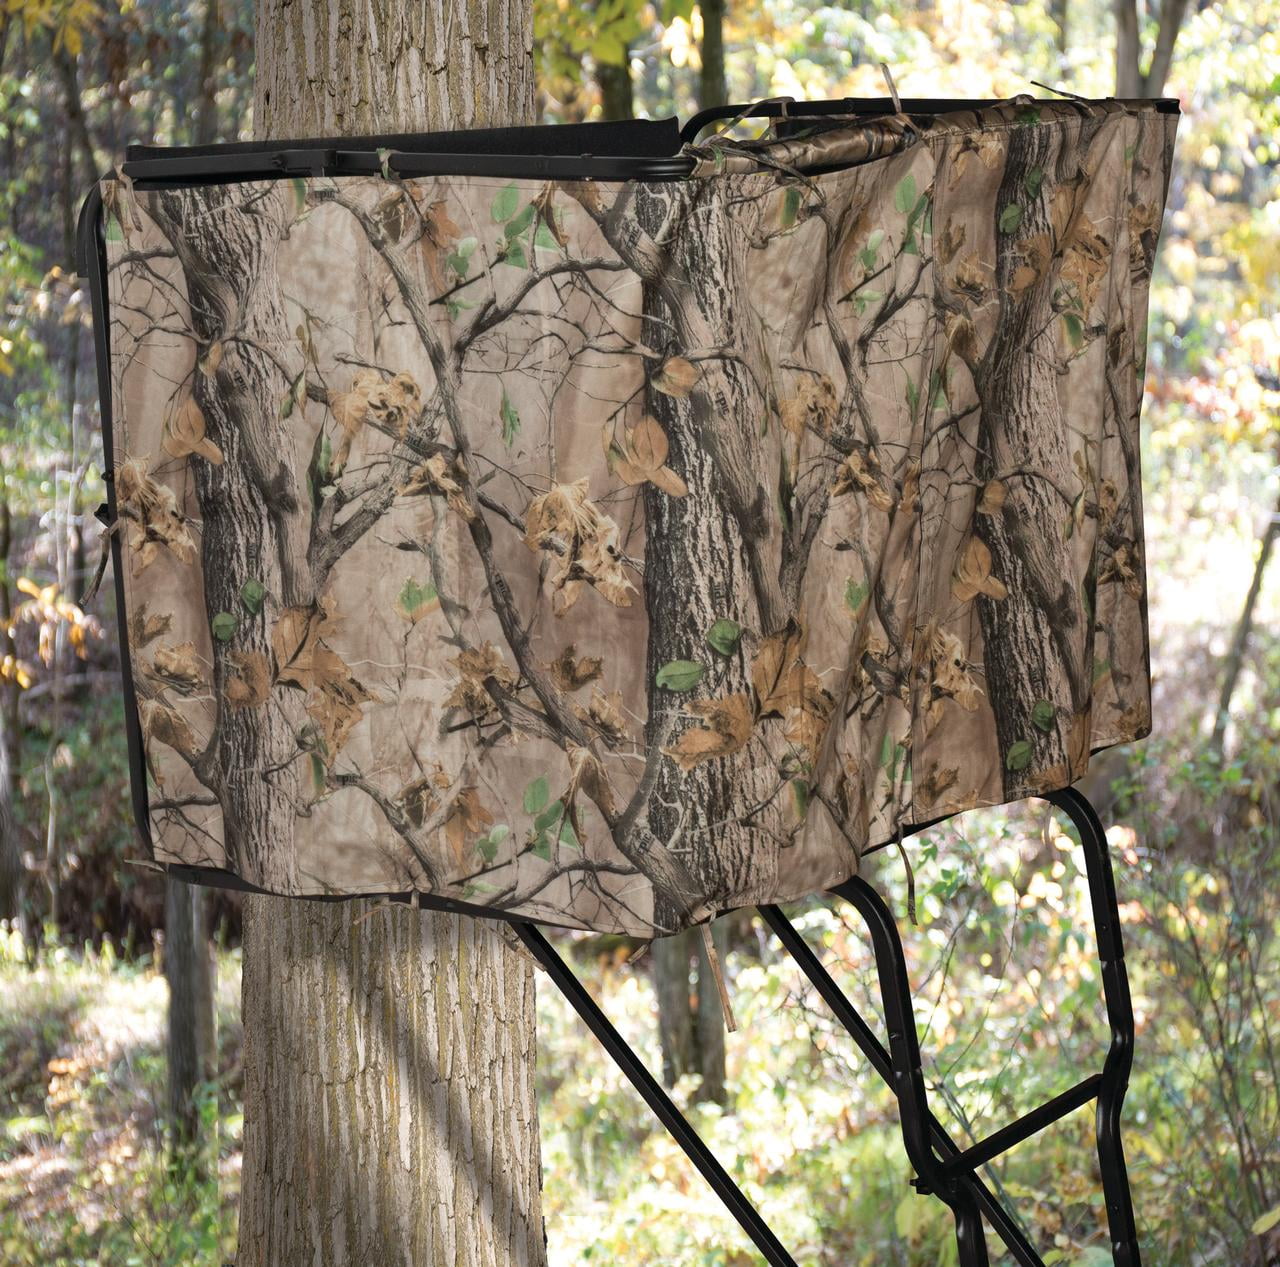 STAND NOT INCLUDED New X-Stand Treestands Two Person Ladderstand Blind Kit 